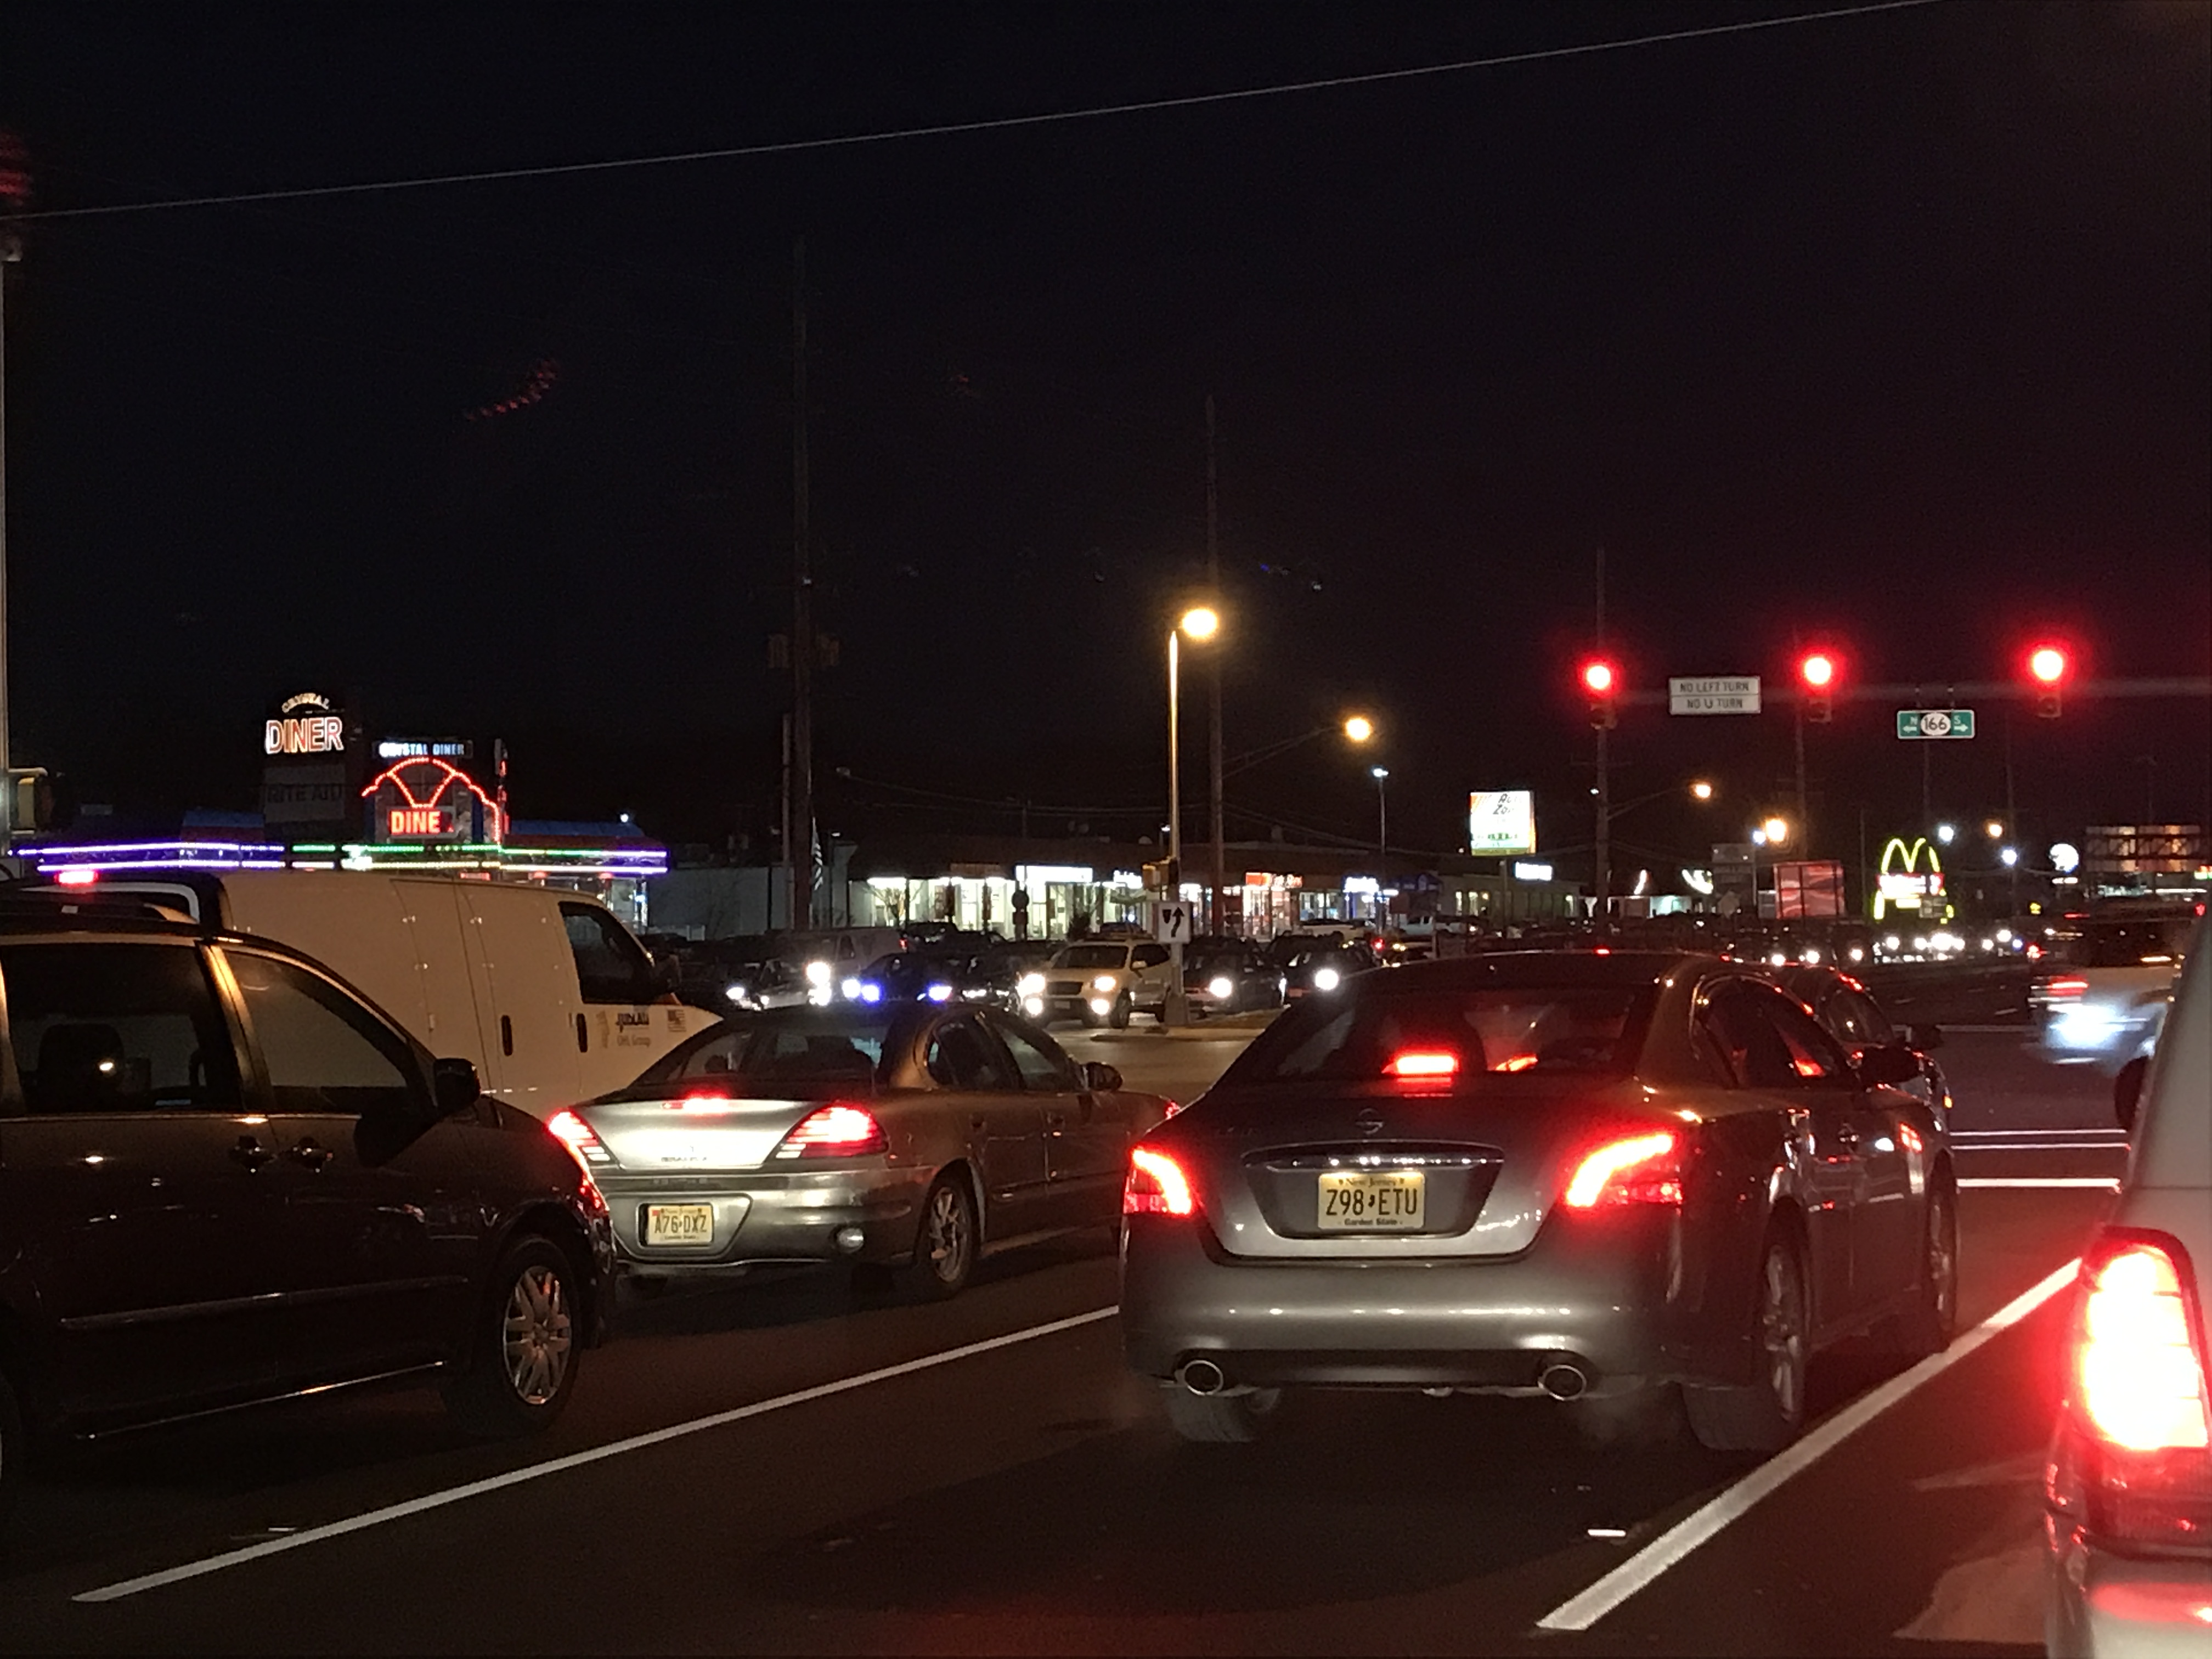 SEA OF RED: Traffic backed up at the intersection of routes 37 and 166 in Toms River, Dec. 2018. (Photo: Daniel Nee)